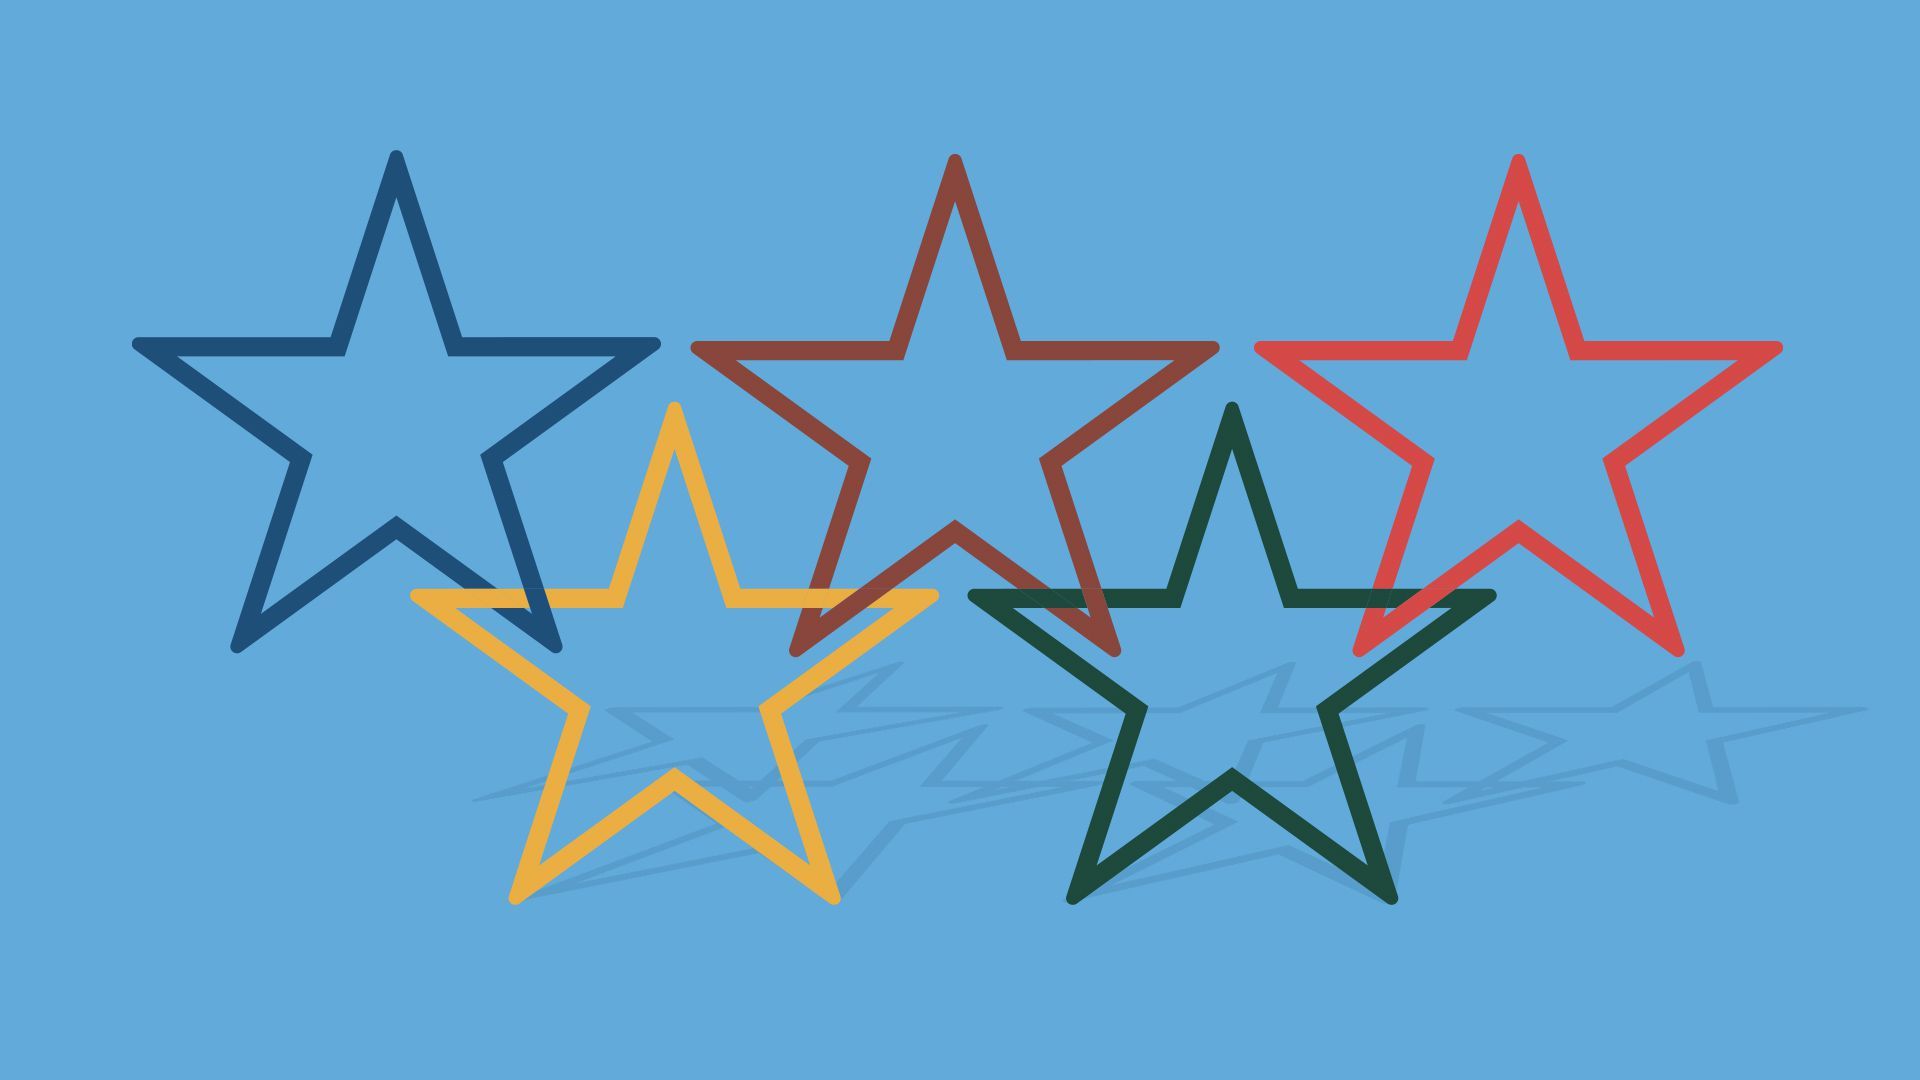 Illustration of the Olympic rings stylized as stars